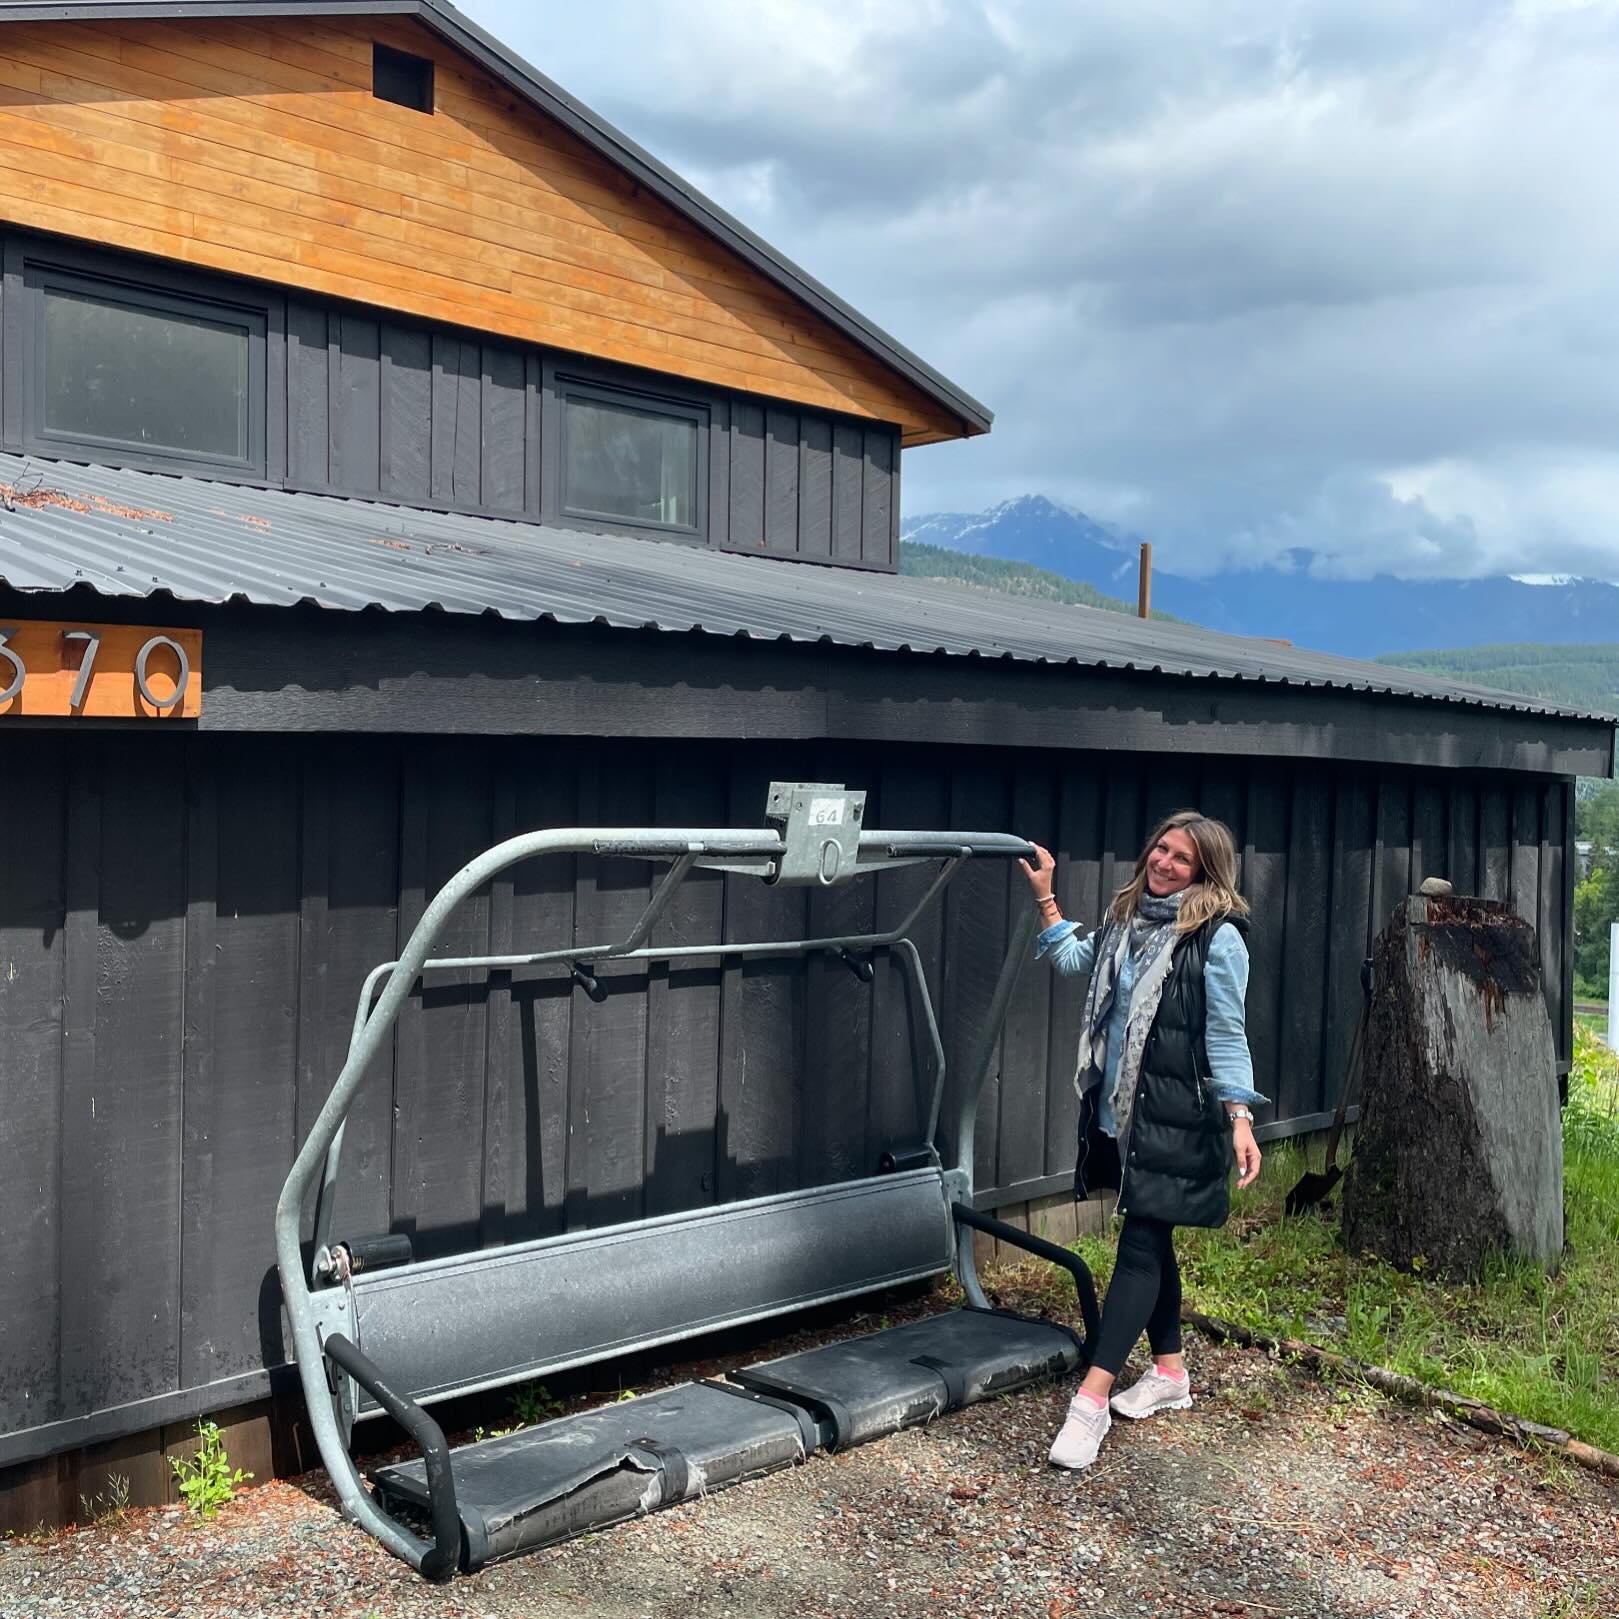 I always thought having a chairlift would be a dream... and today, the Jersey Cream chair from Blackcomb arrived! 🏔️ With some TLC, this iconic piece will become a fantastic addition to our yard. Imagine a cozy swing or a unique workspace, all while